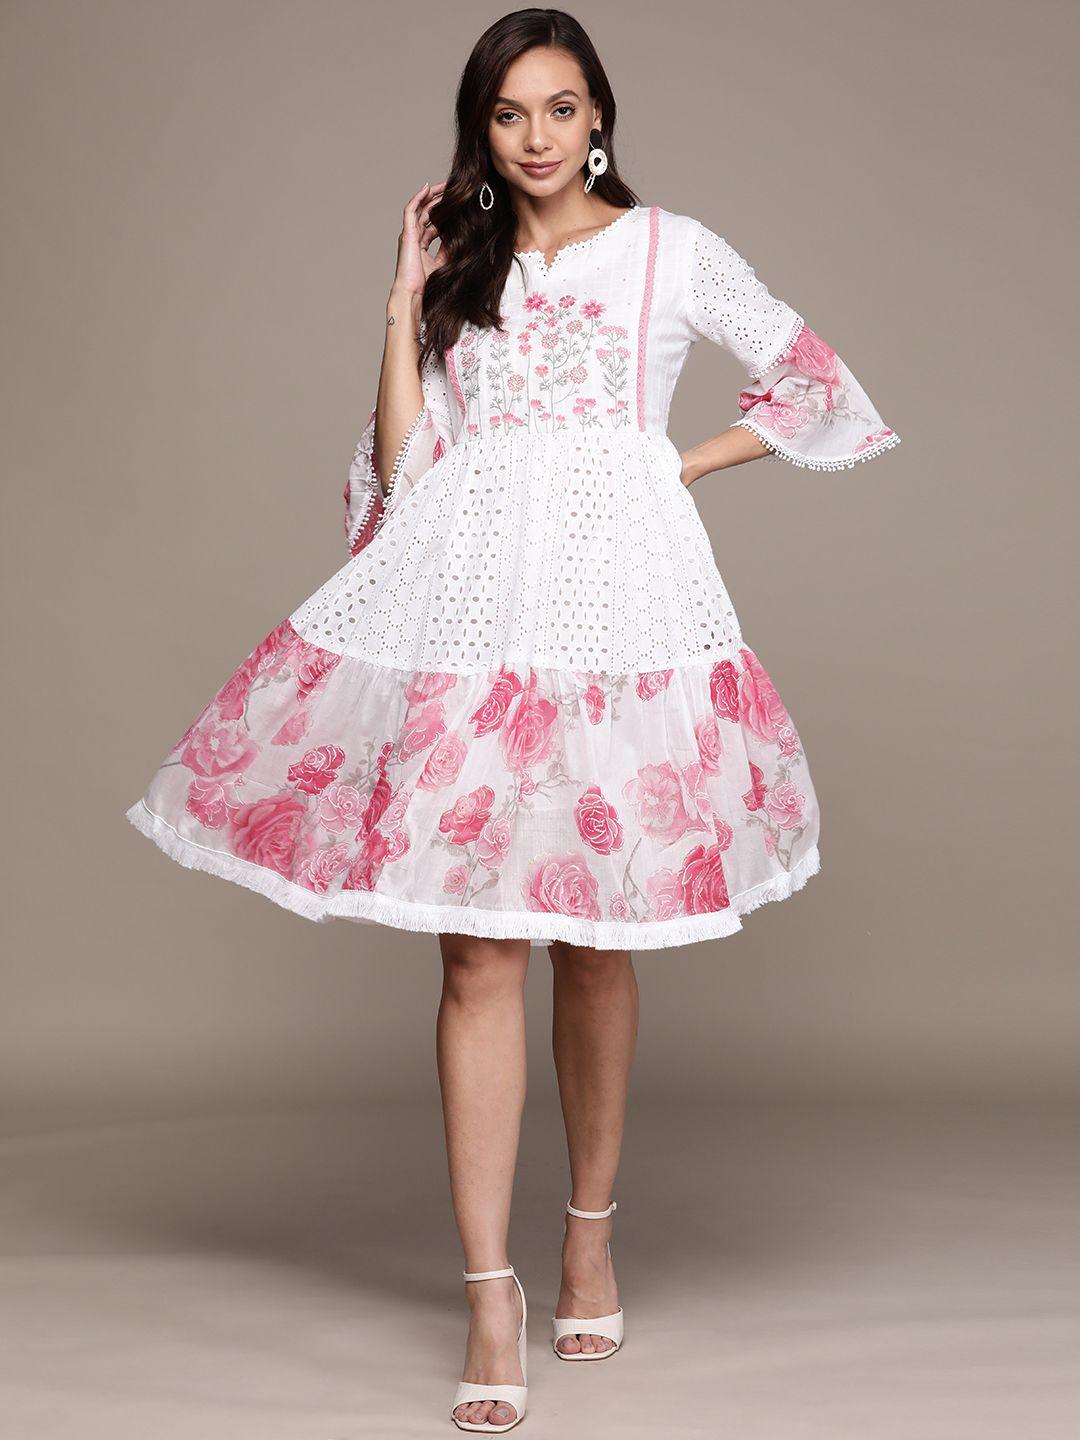 ishin-white-&-pink-floral-embroidered-a-line-dress